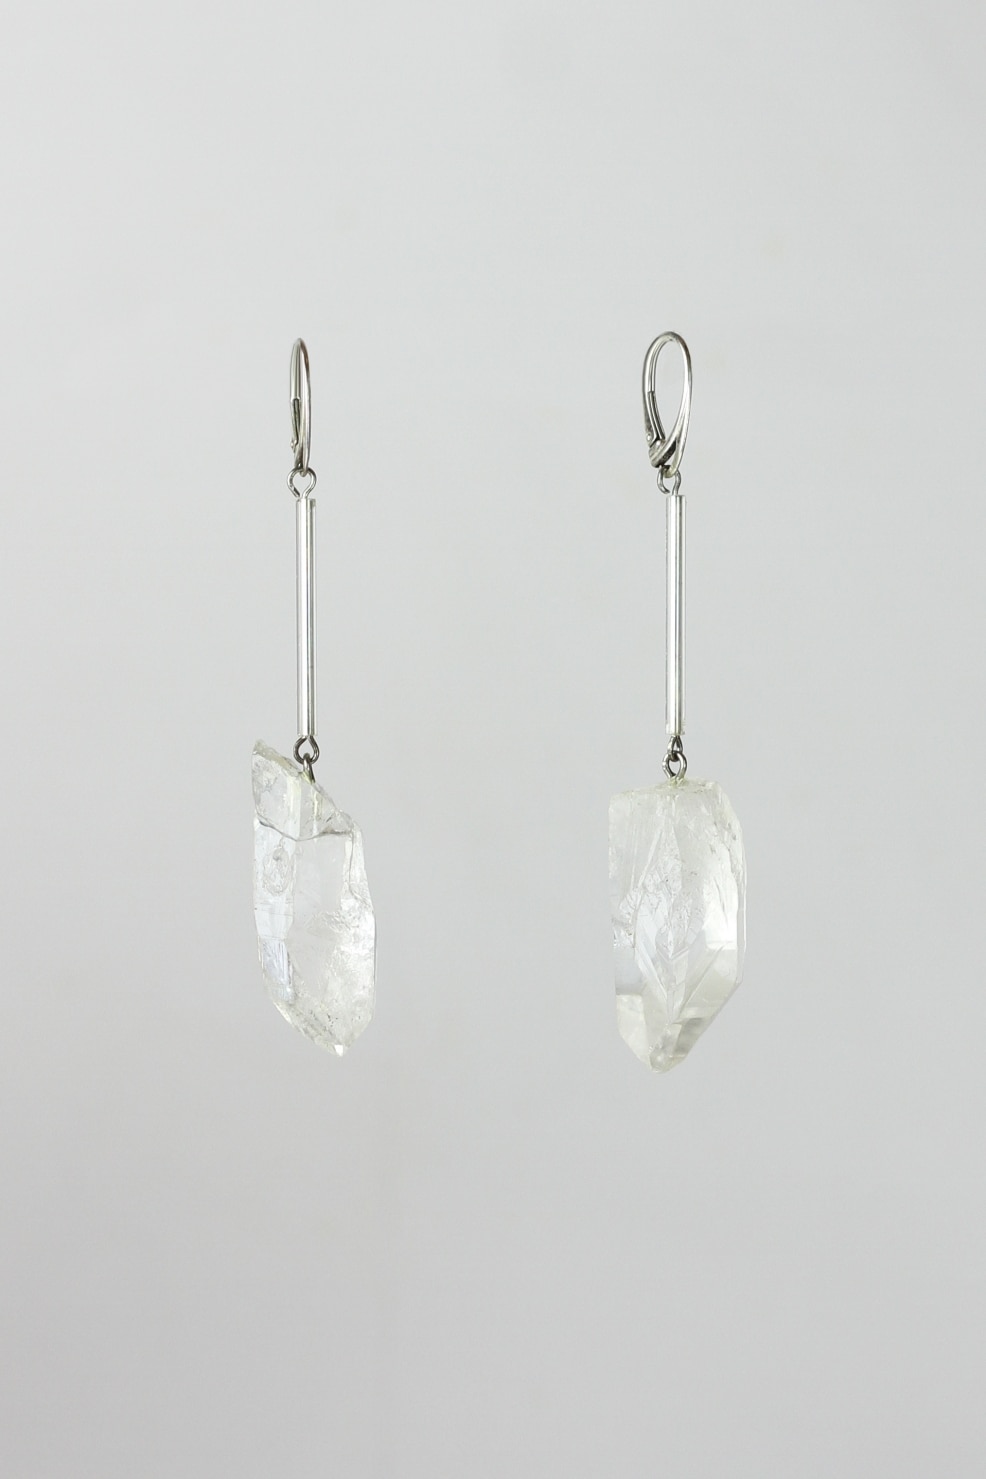 Raw quartz, glass and silver earrings